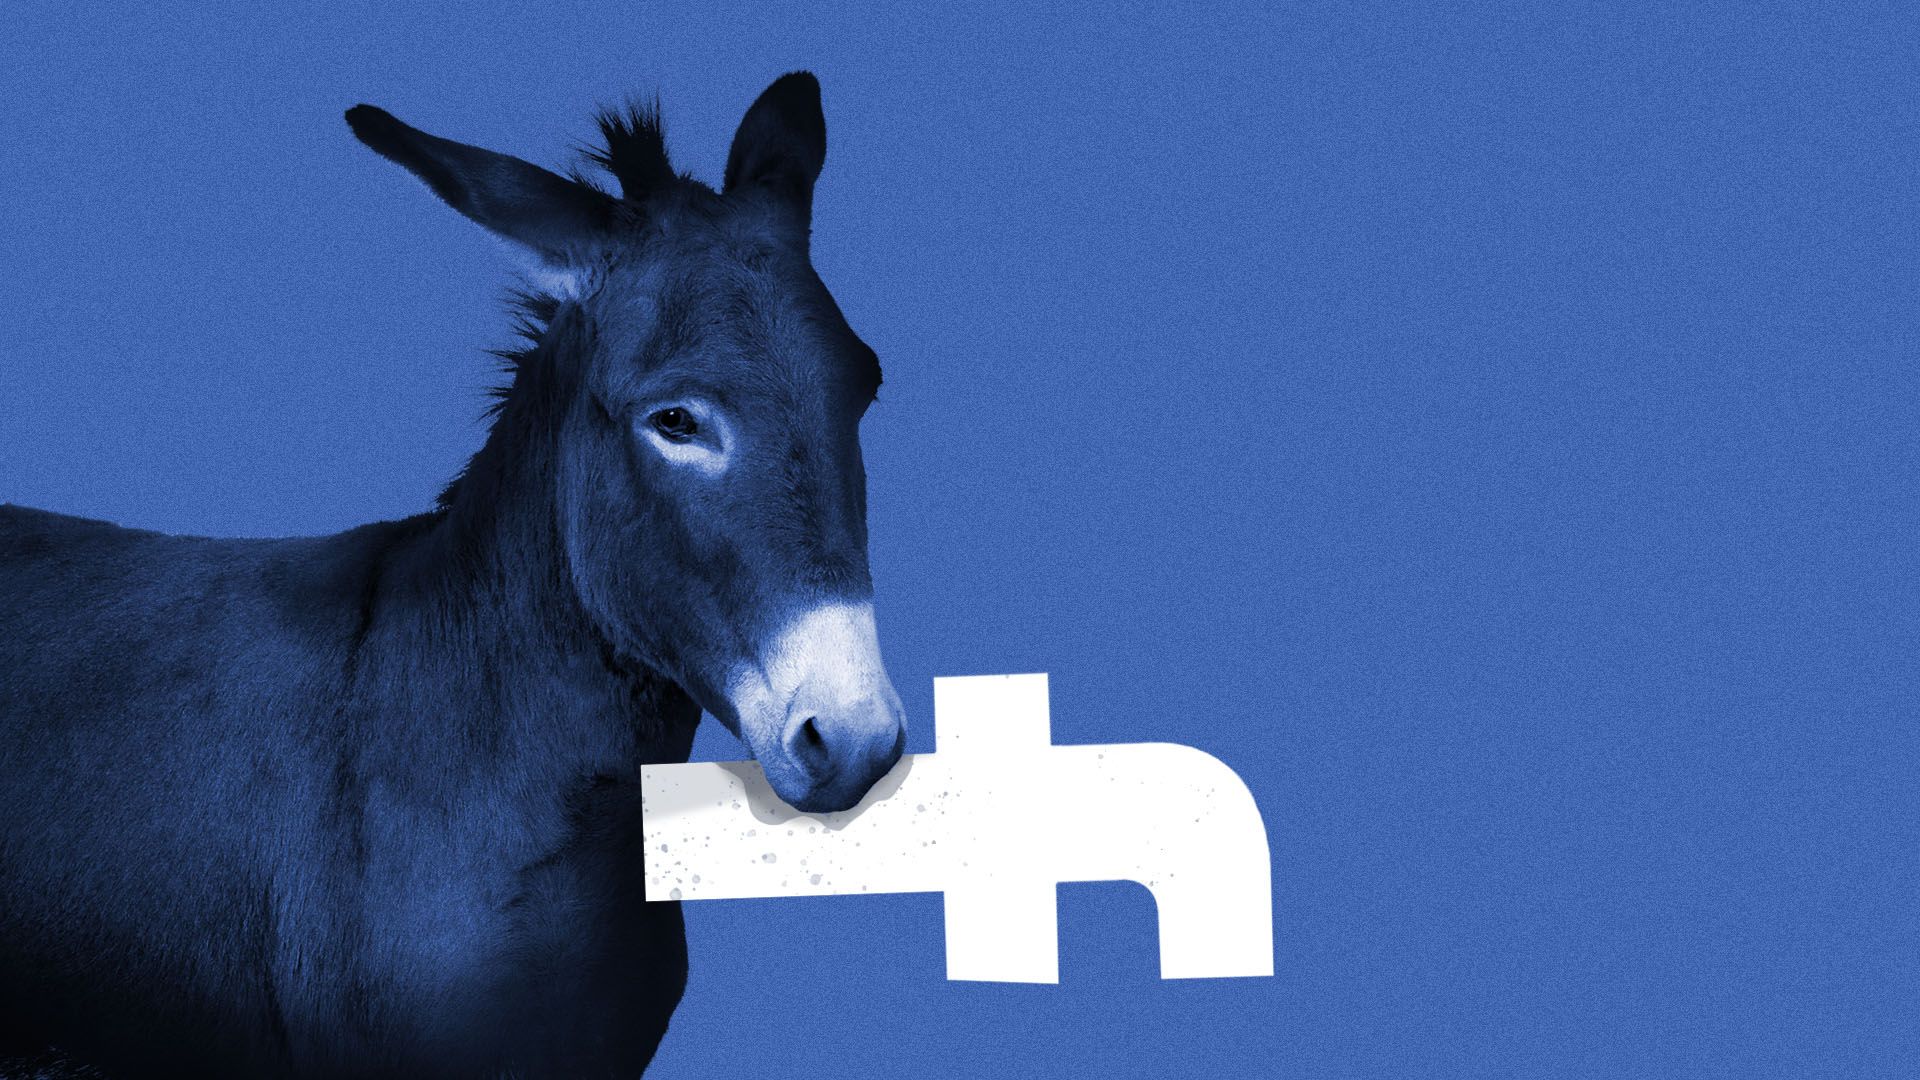 Illustration of a donkey with the facebook logo in its mouth